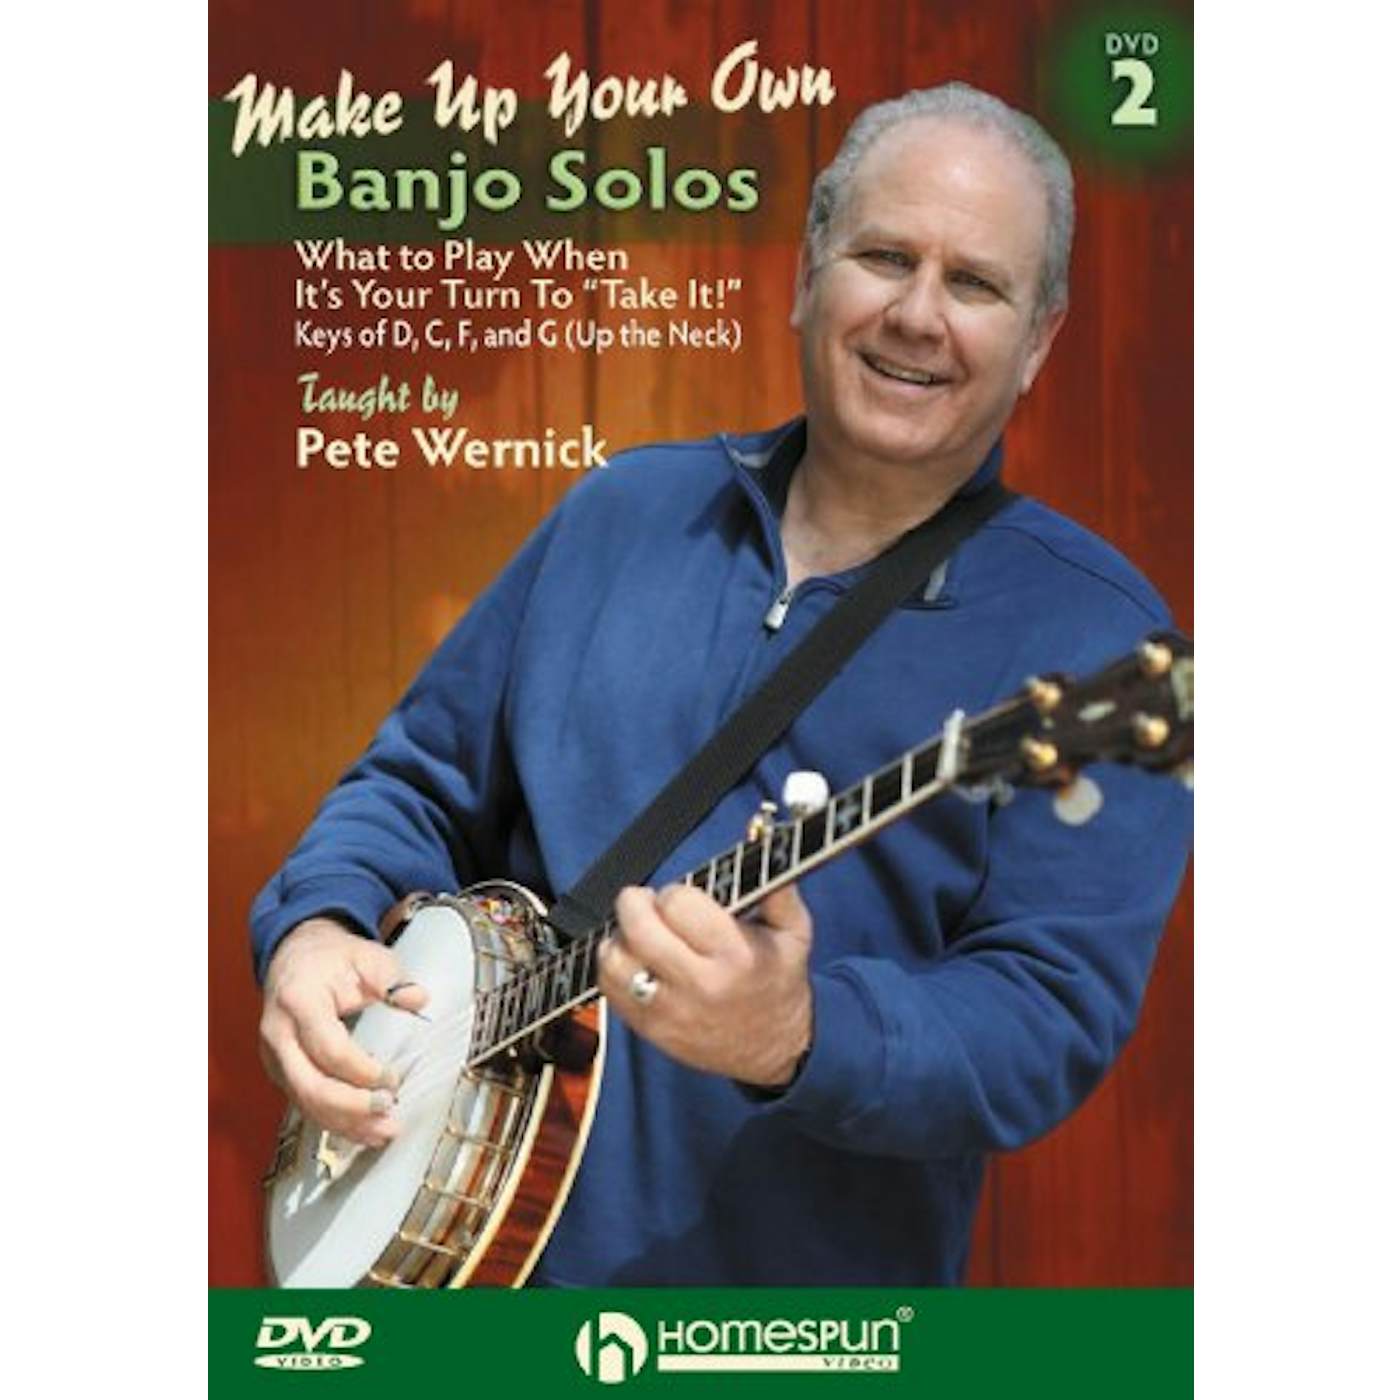 Pete Wernick MAKE UP YOUR OWN BANJO SOLOS 2 DVD